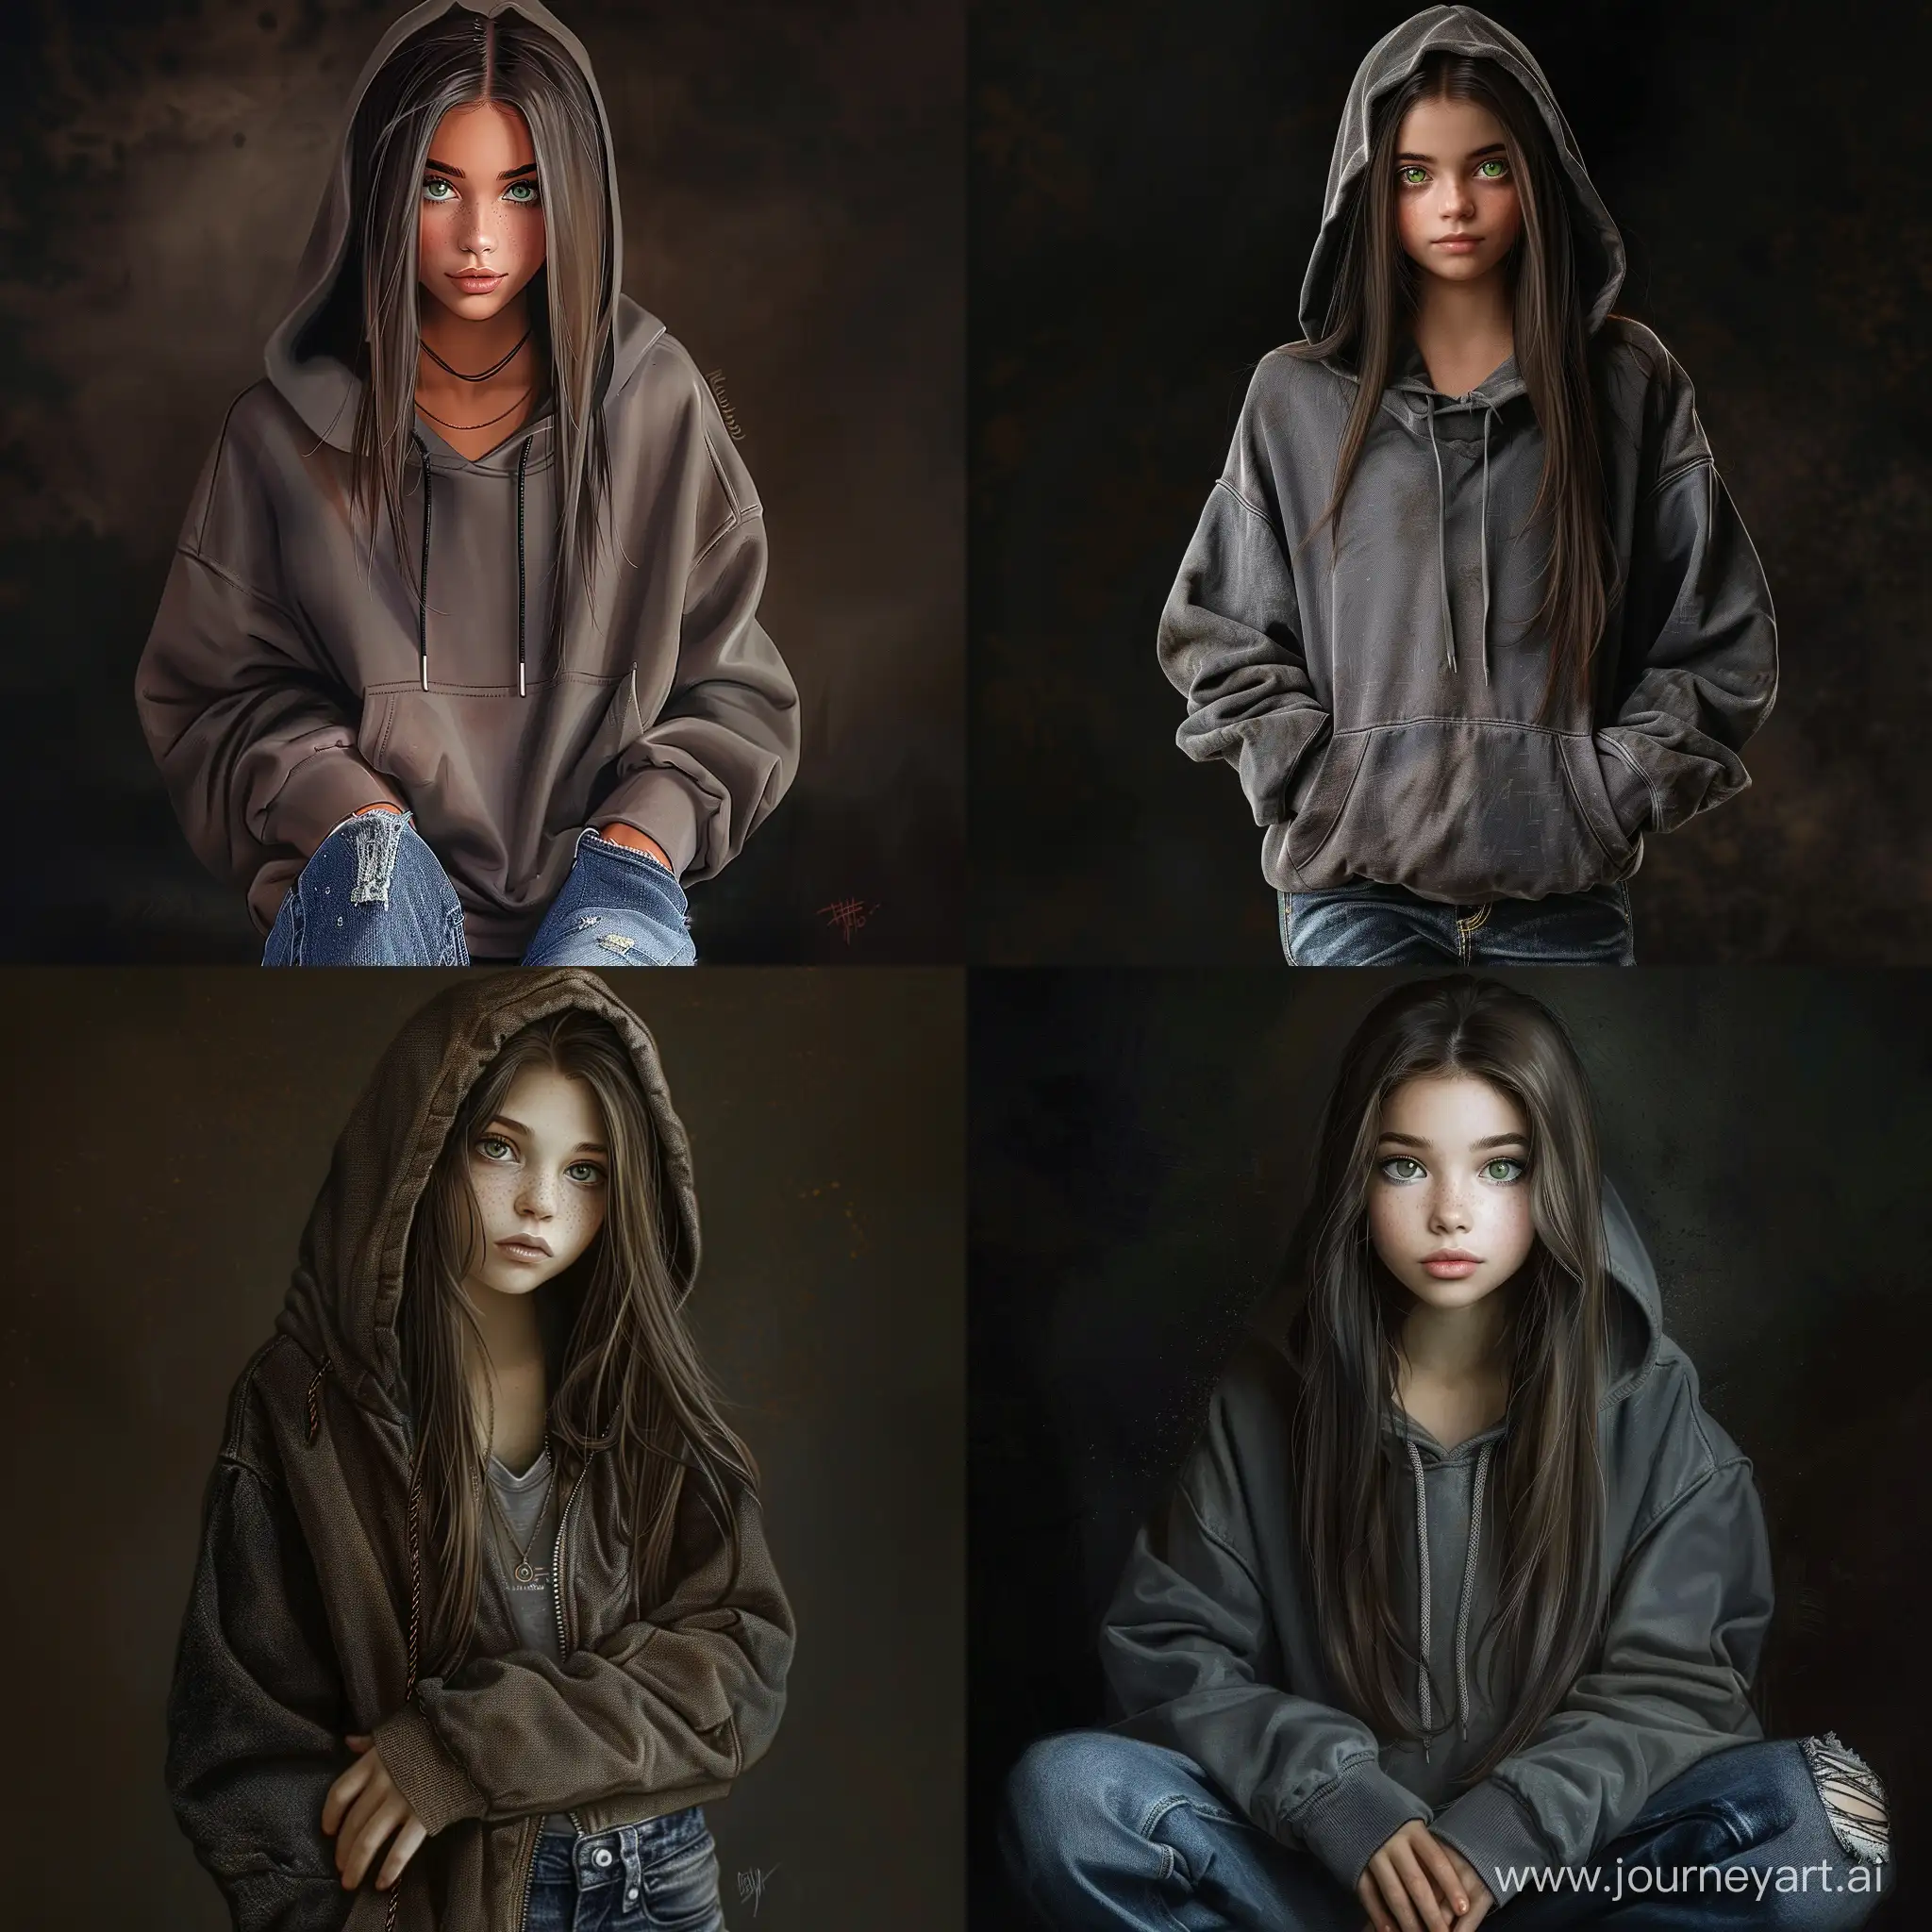 Stylish-Teenage-Girl-in-Oversized-Hoodie-and-Jeans-on-Dark-Background